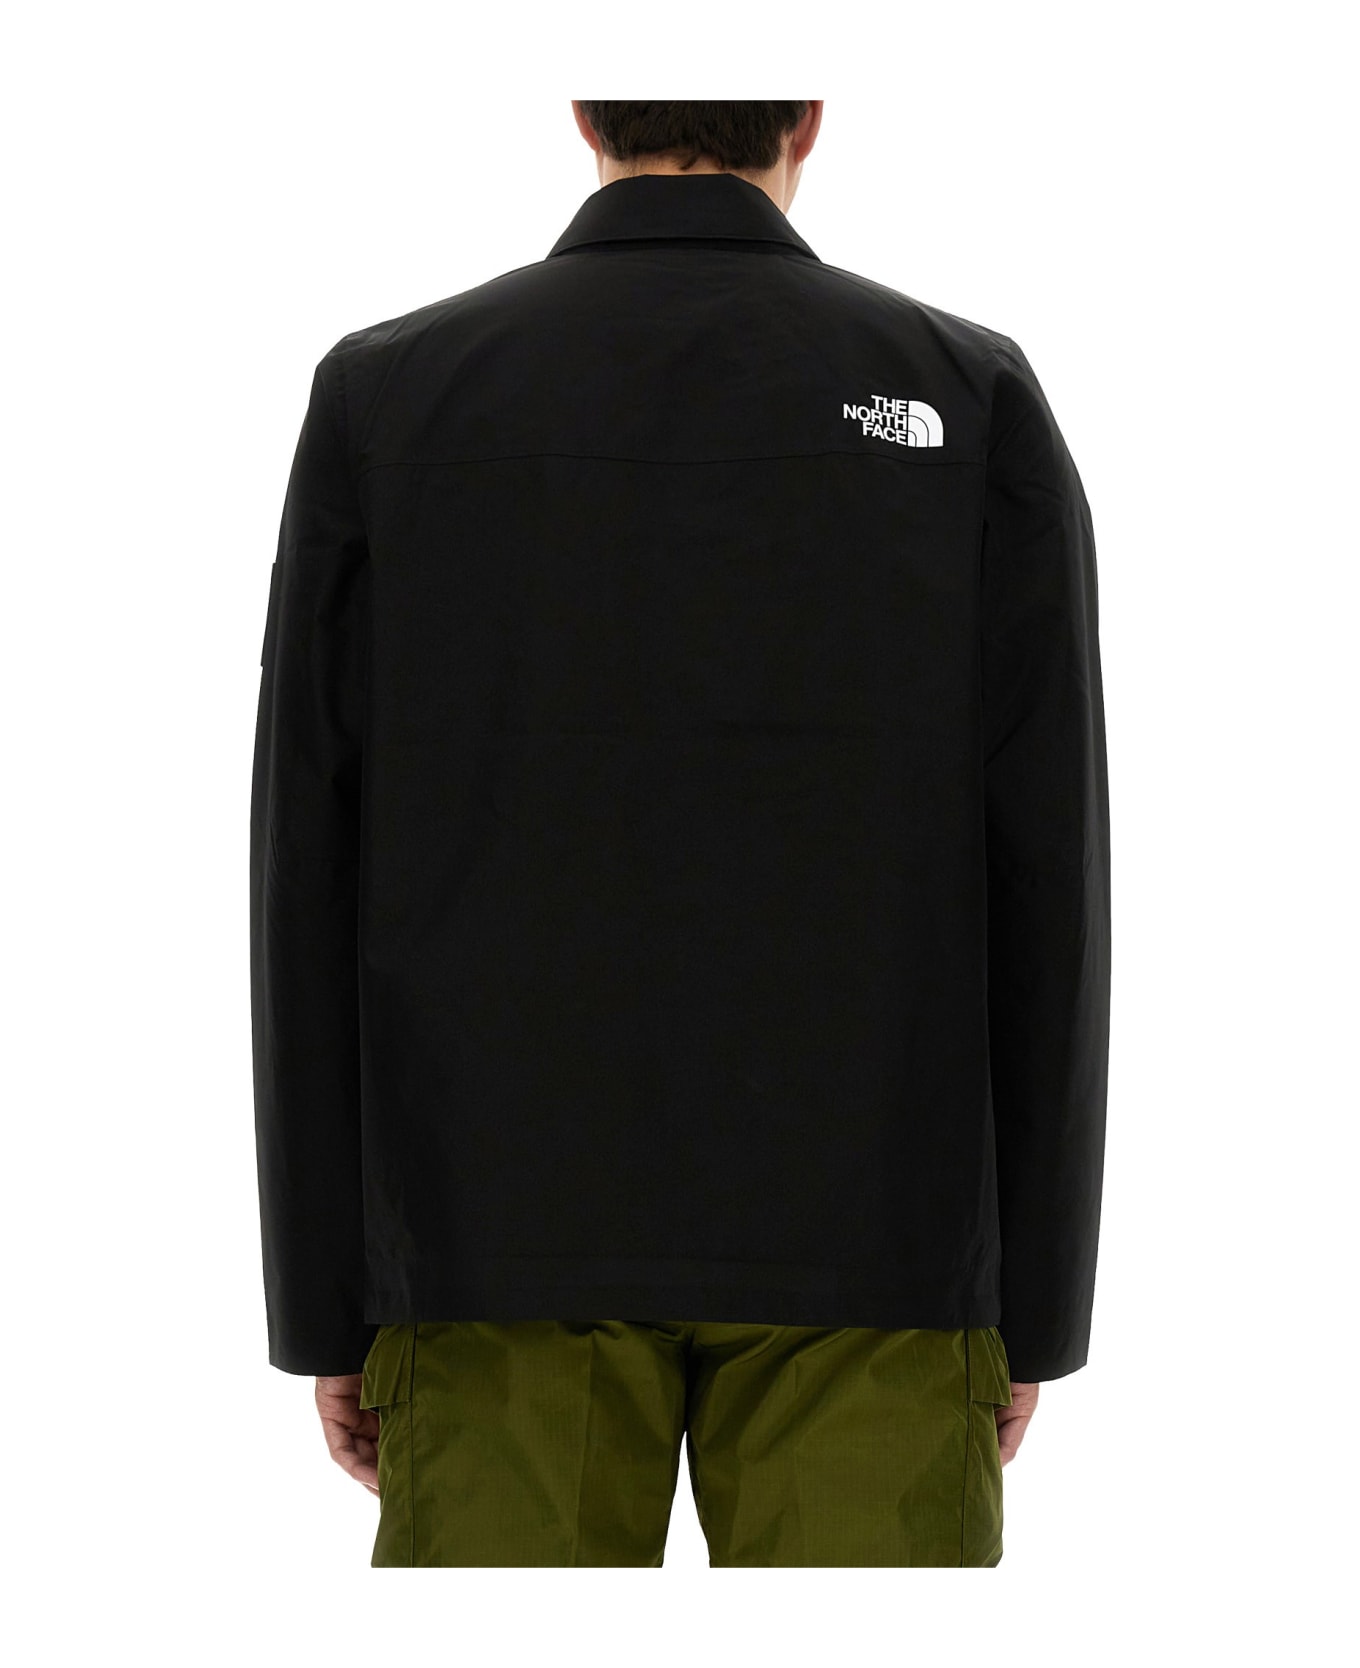 The North Face Jacket With Logo - BLACK ジャケット